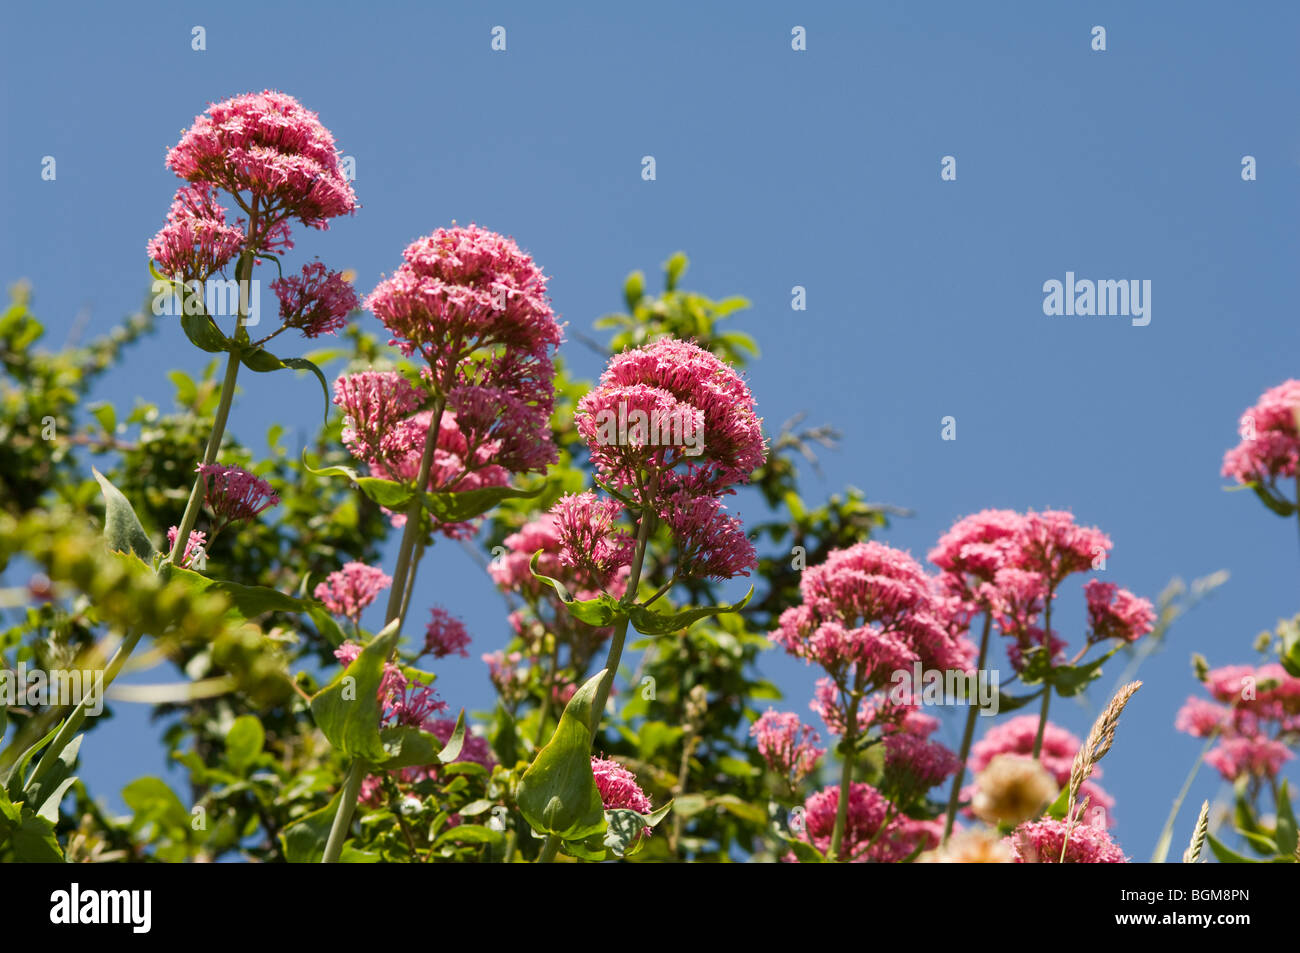 Red valerian (Centranthus ruber) growing wild against a blue sky Stock Photo